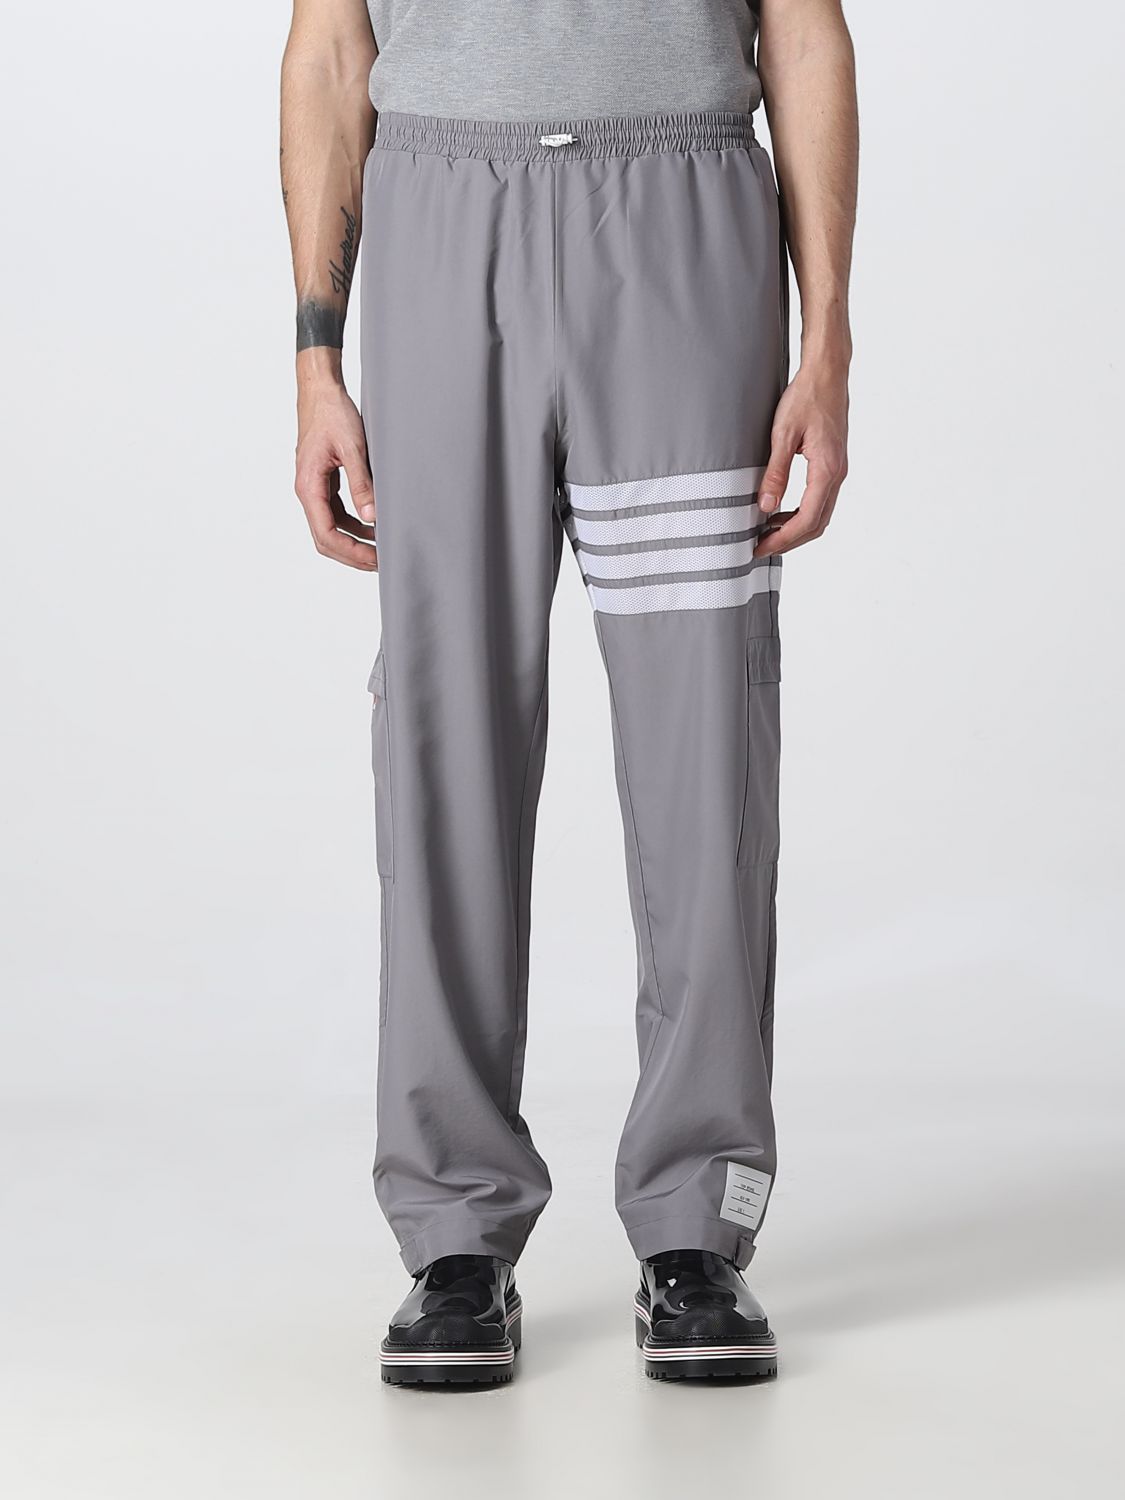 THOM BROWNE THOM BROWN TROUSERS IN TECHNICAL FABRIC,381226020